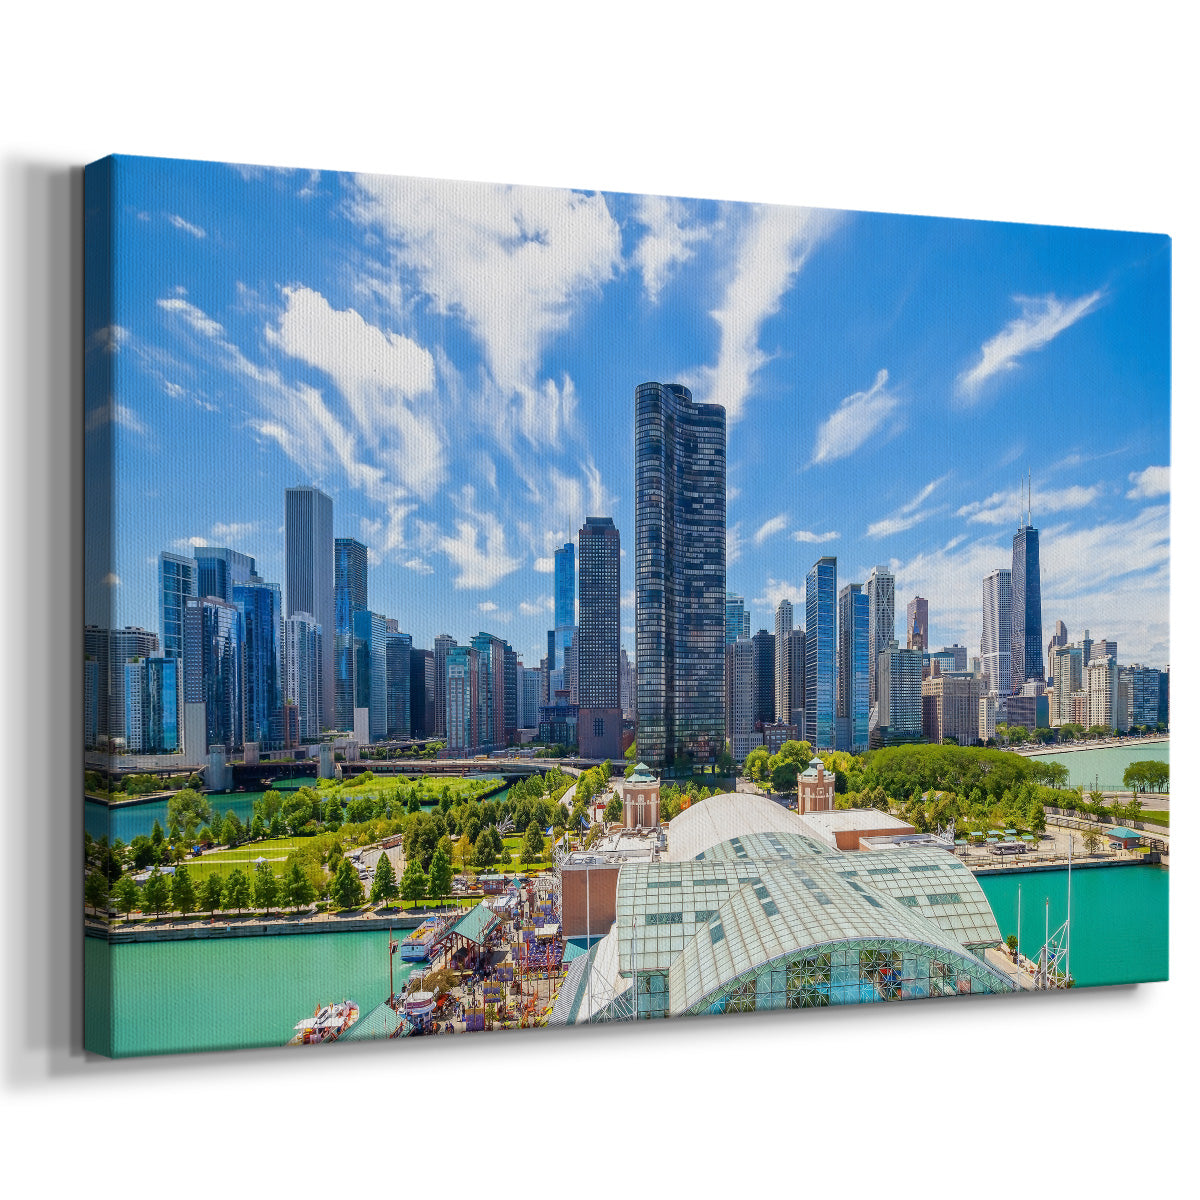 Chicago Navy Pier Aerial - Gallery Wrapped Canvas